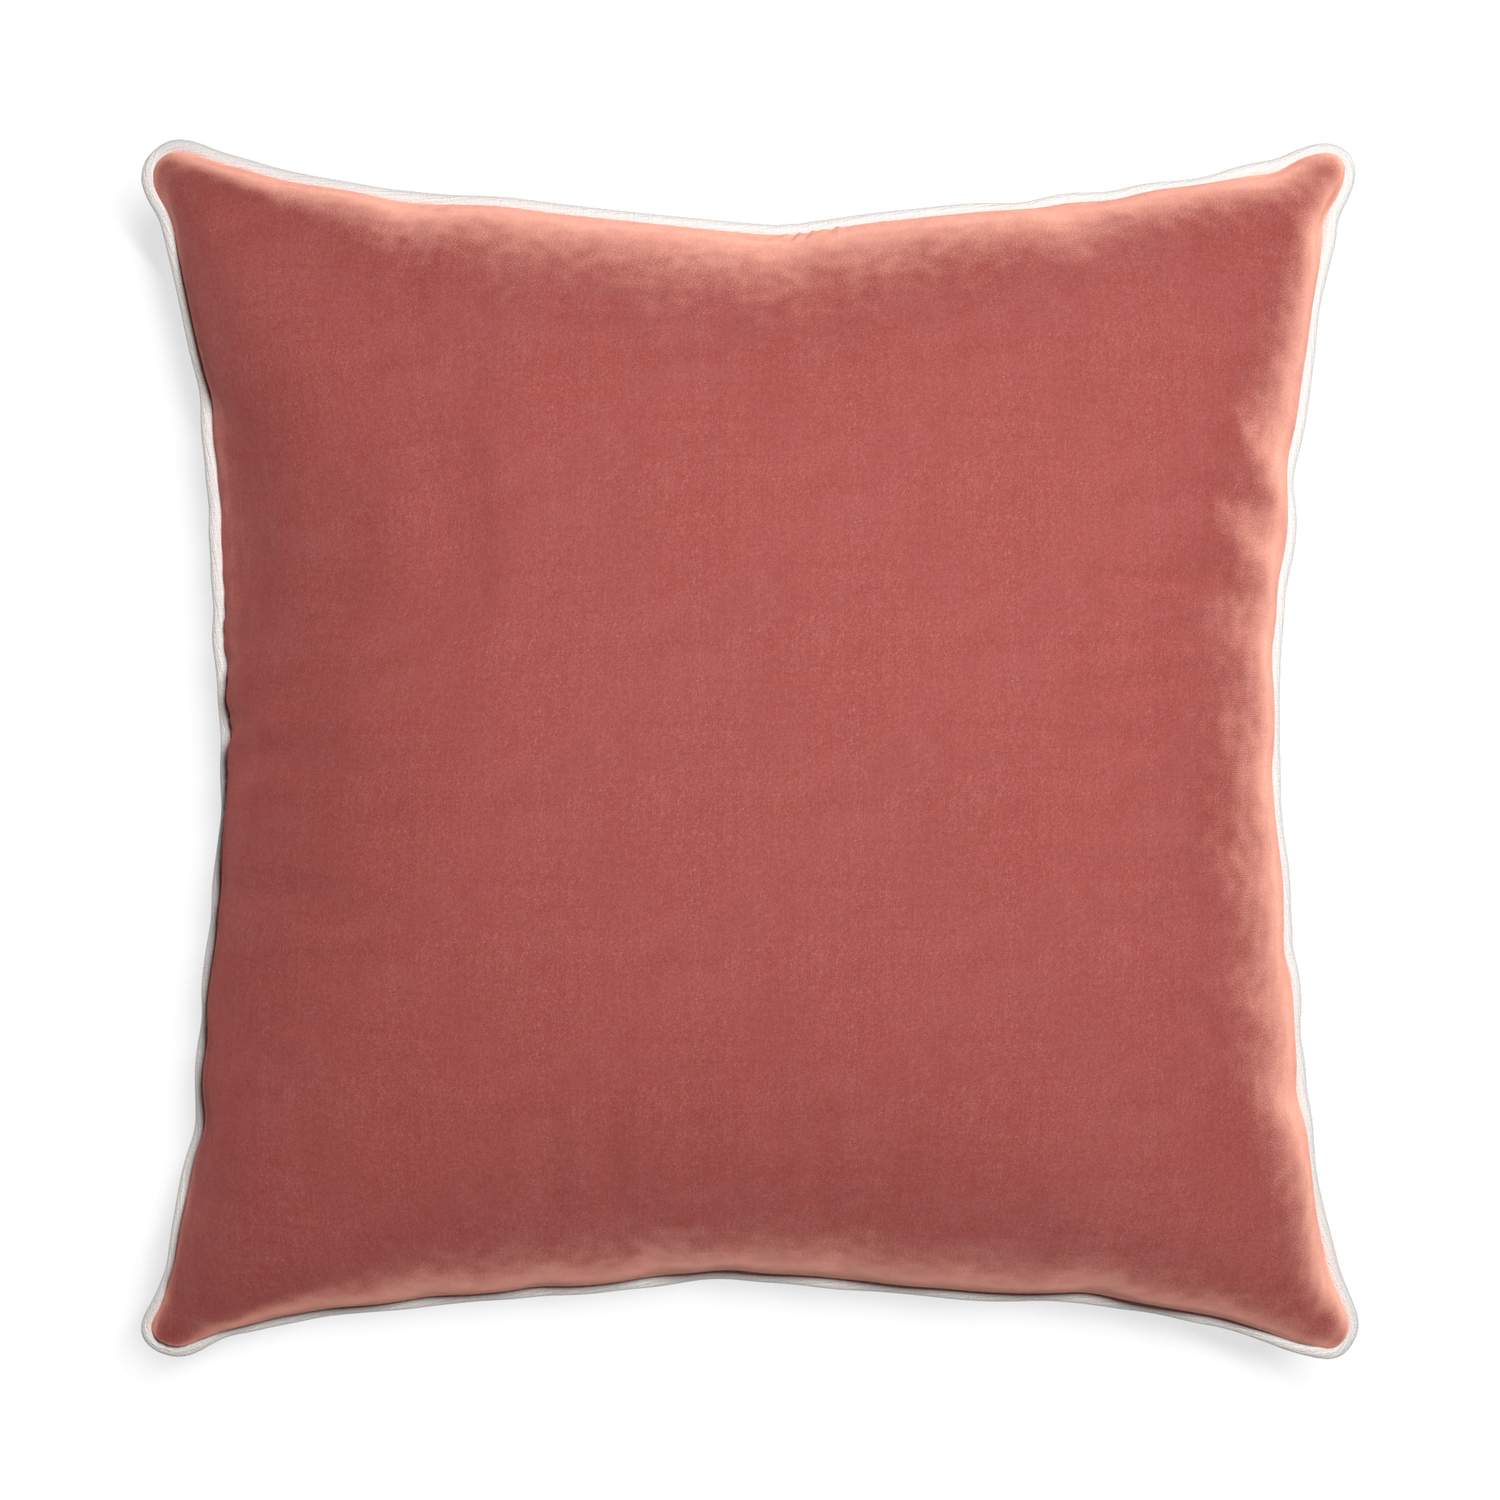 Euro-sham cosmo velvet custom coralpillow with snow piping on white background